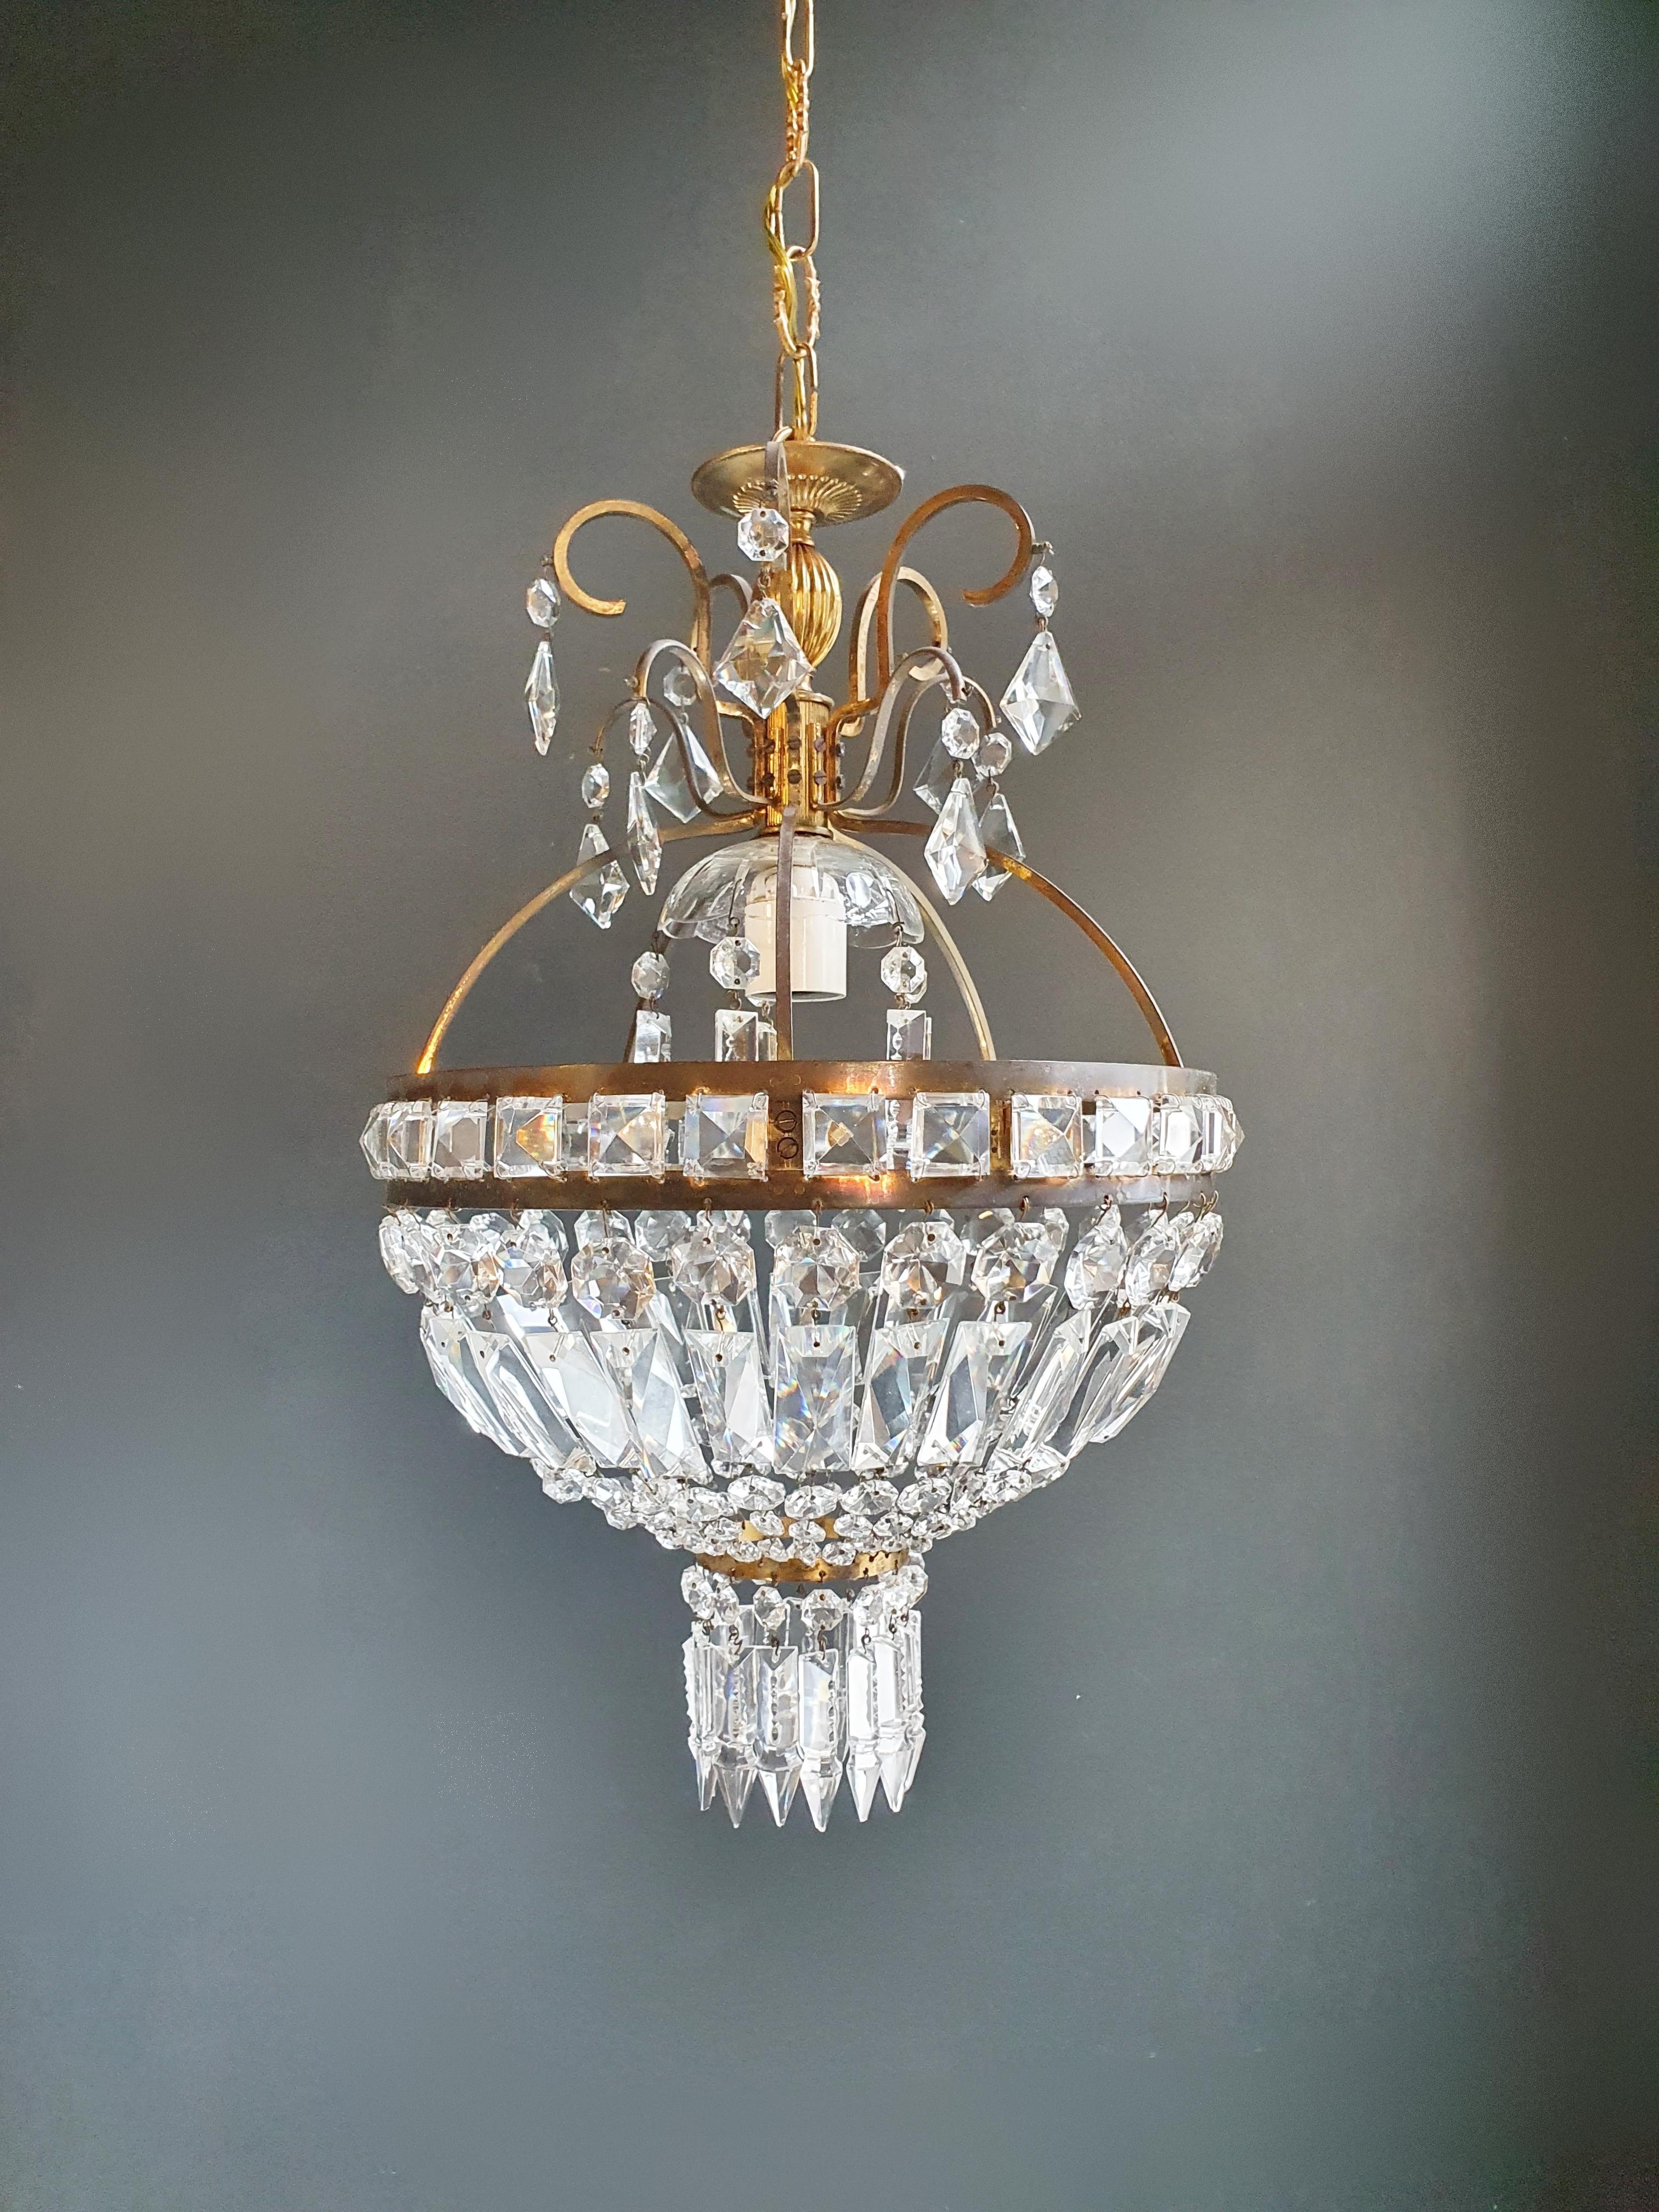 Cabling and sockets completely renewed. Crystal hand knotted
Measures: Total height: 80 cm, height without chain: 50 cm, diameter 30 cm, weight (approximately) 4kg.

Number of lights: 1 -light Bulub sockets: E27
Brass frame.
Total length